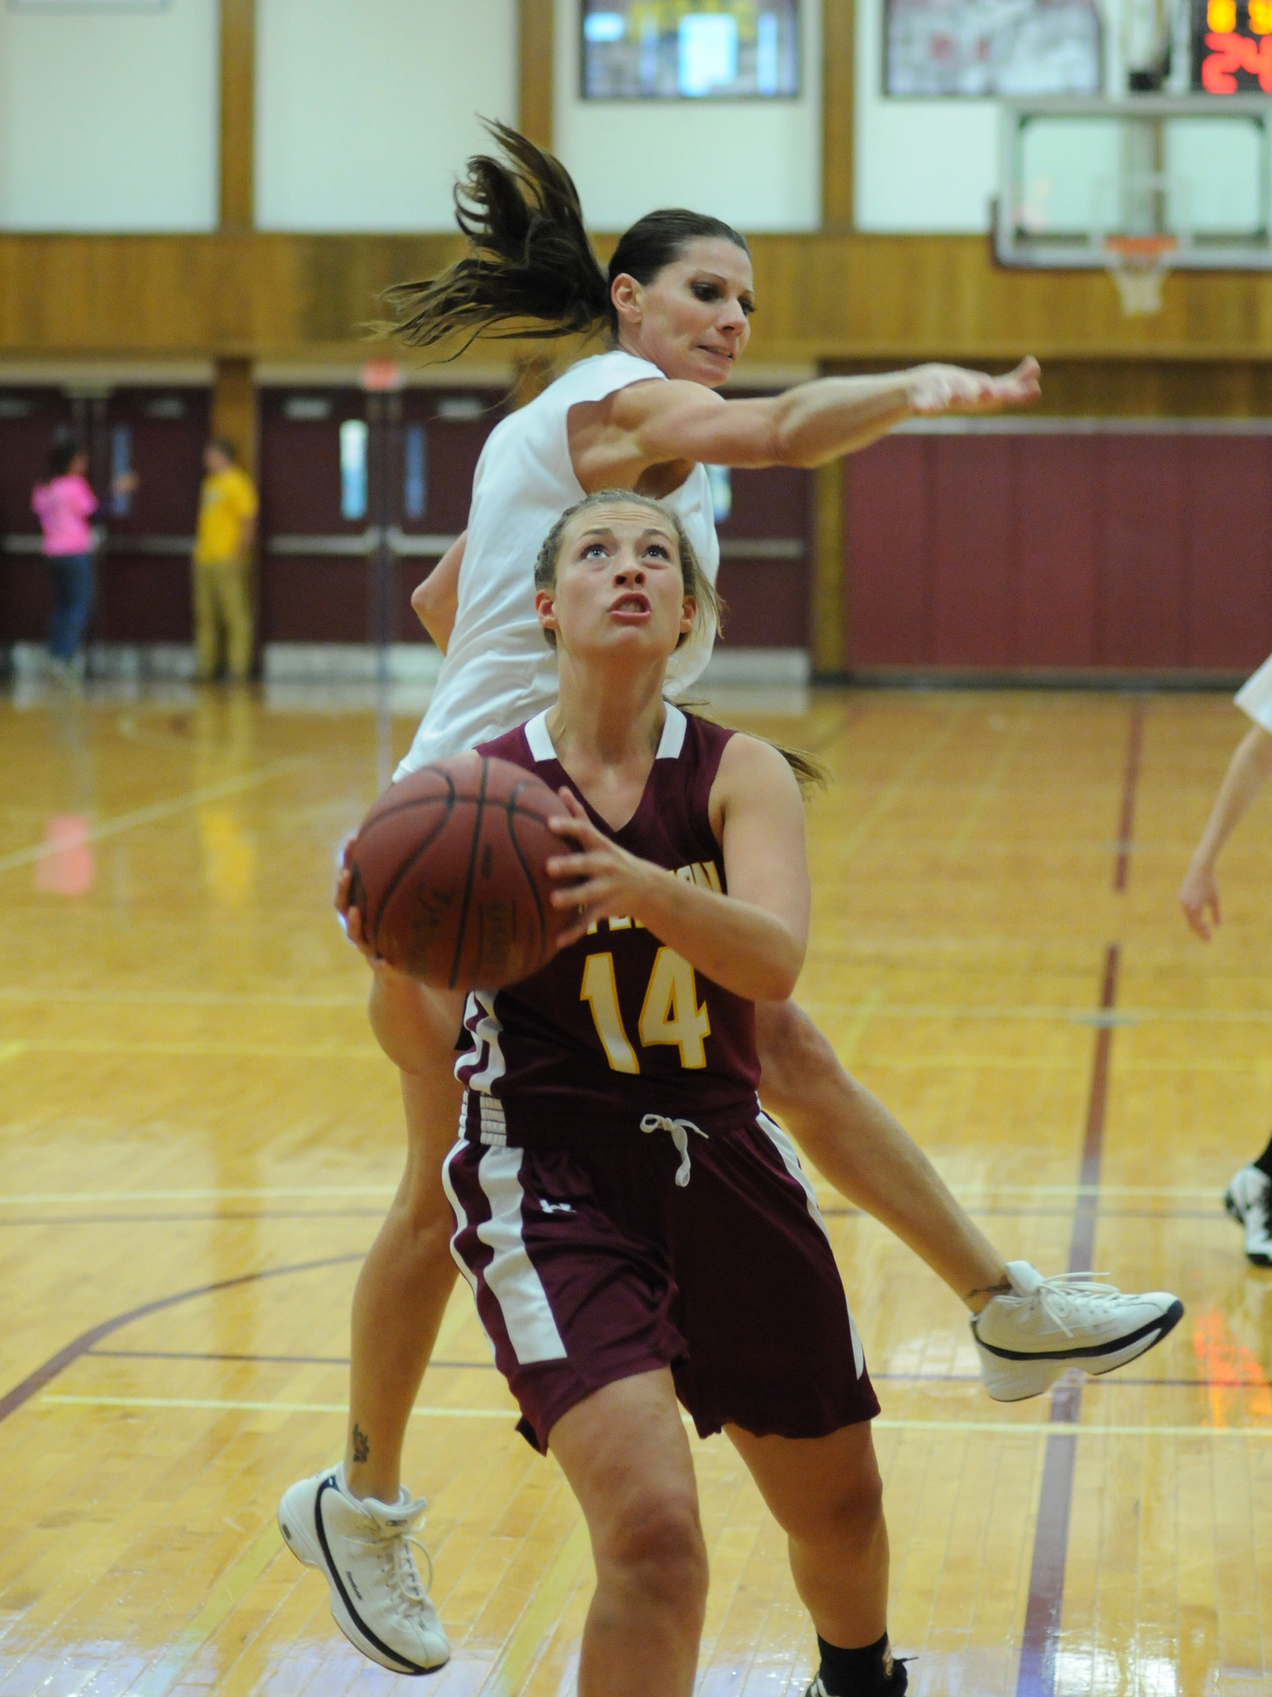 The Lady Cannoneers Split In Torcia Classic